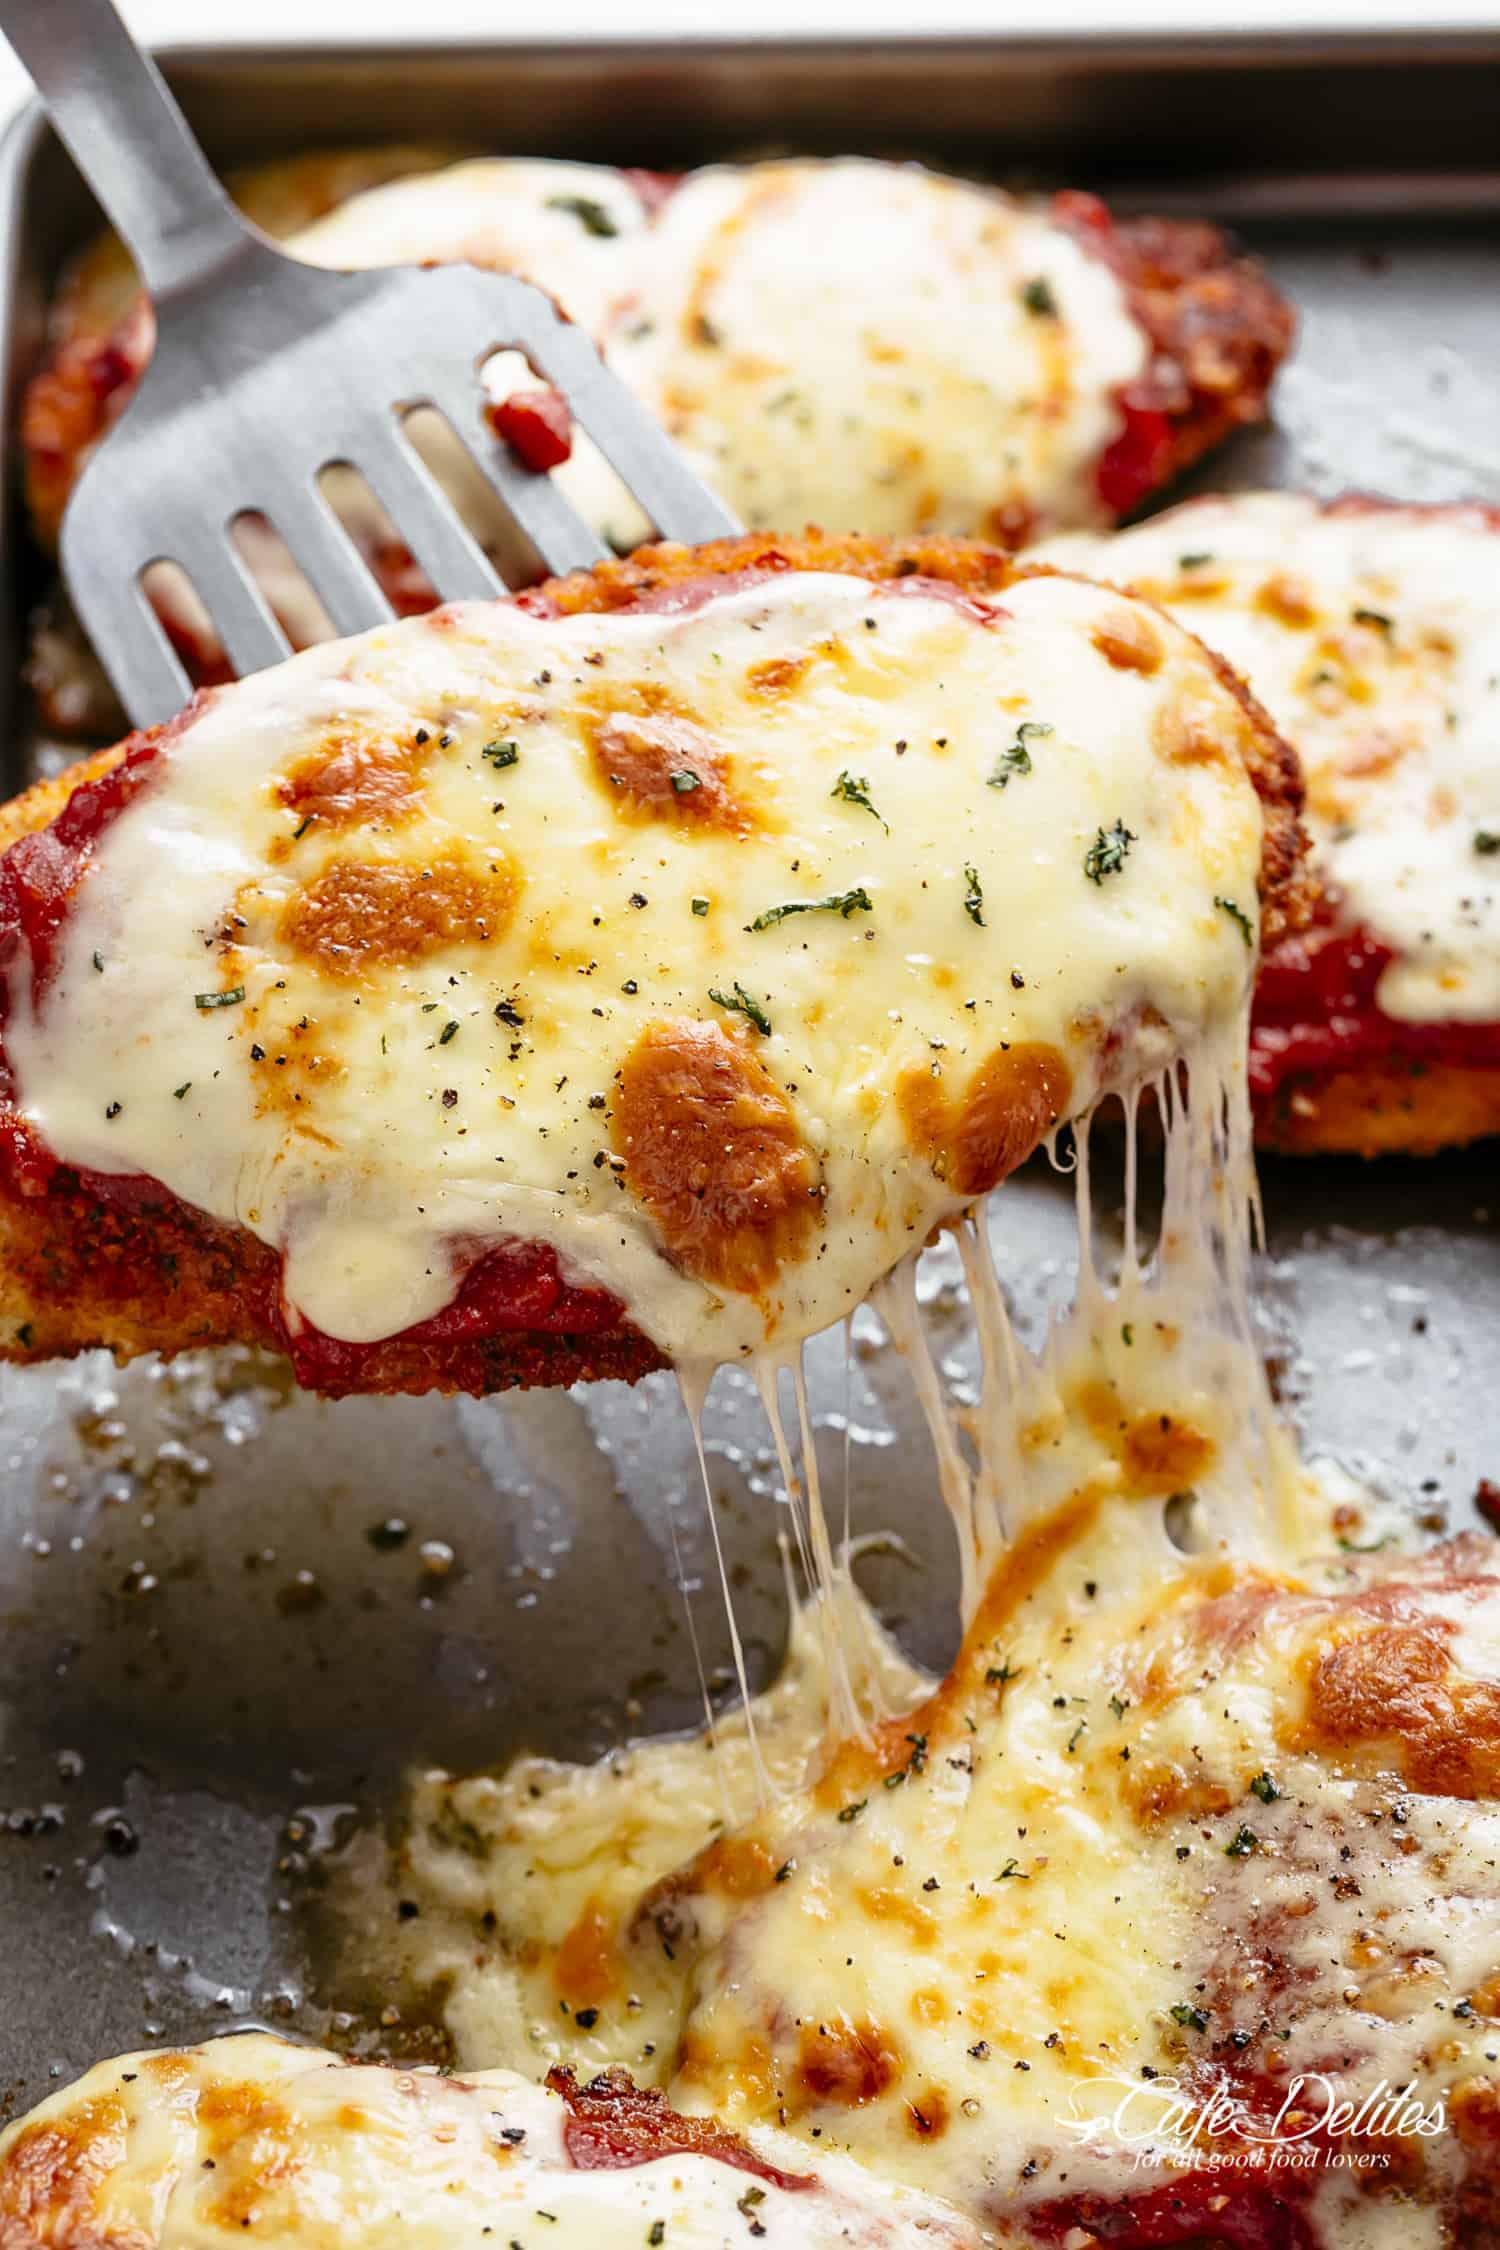 The Best Chicken Parmesan with a deliciously crispy breadcrumb coating, smothered in a rich homemade tomato sauce and melted mozzarella cheese! This is here best Chicken Parmesan you will ever make!  One chicken parmesan being lifted from a baking sheet with a metal spatula and lots of stringy, melted cheese. Just fresh out of the oven.